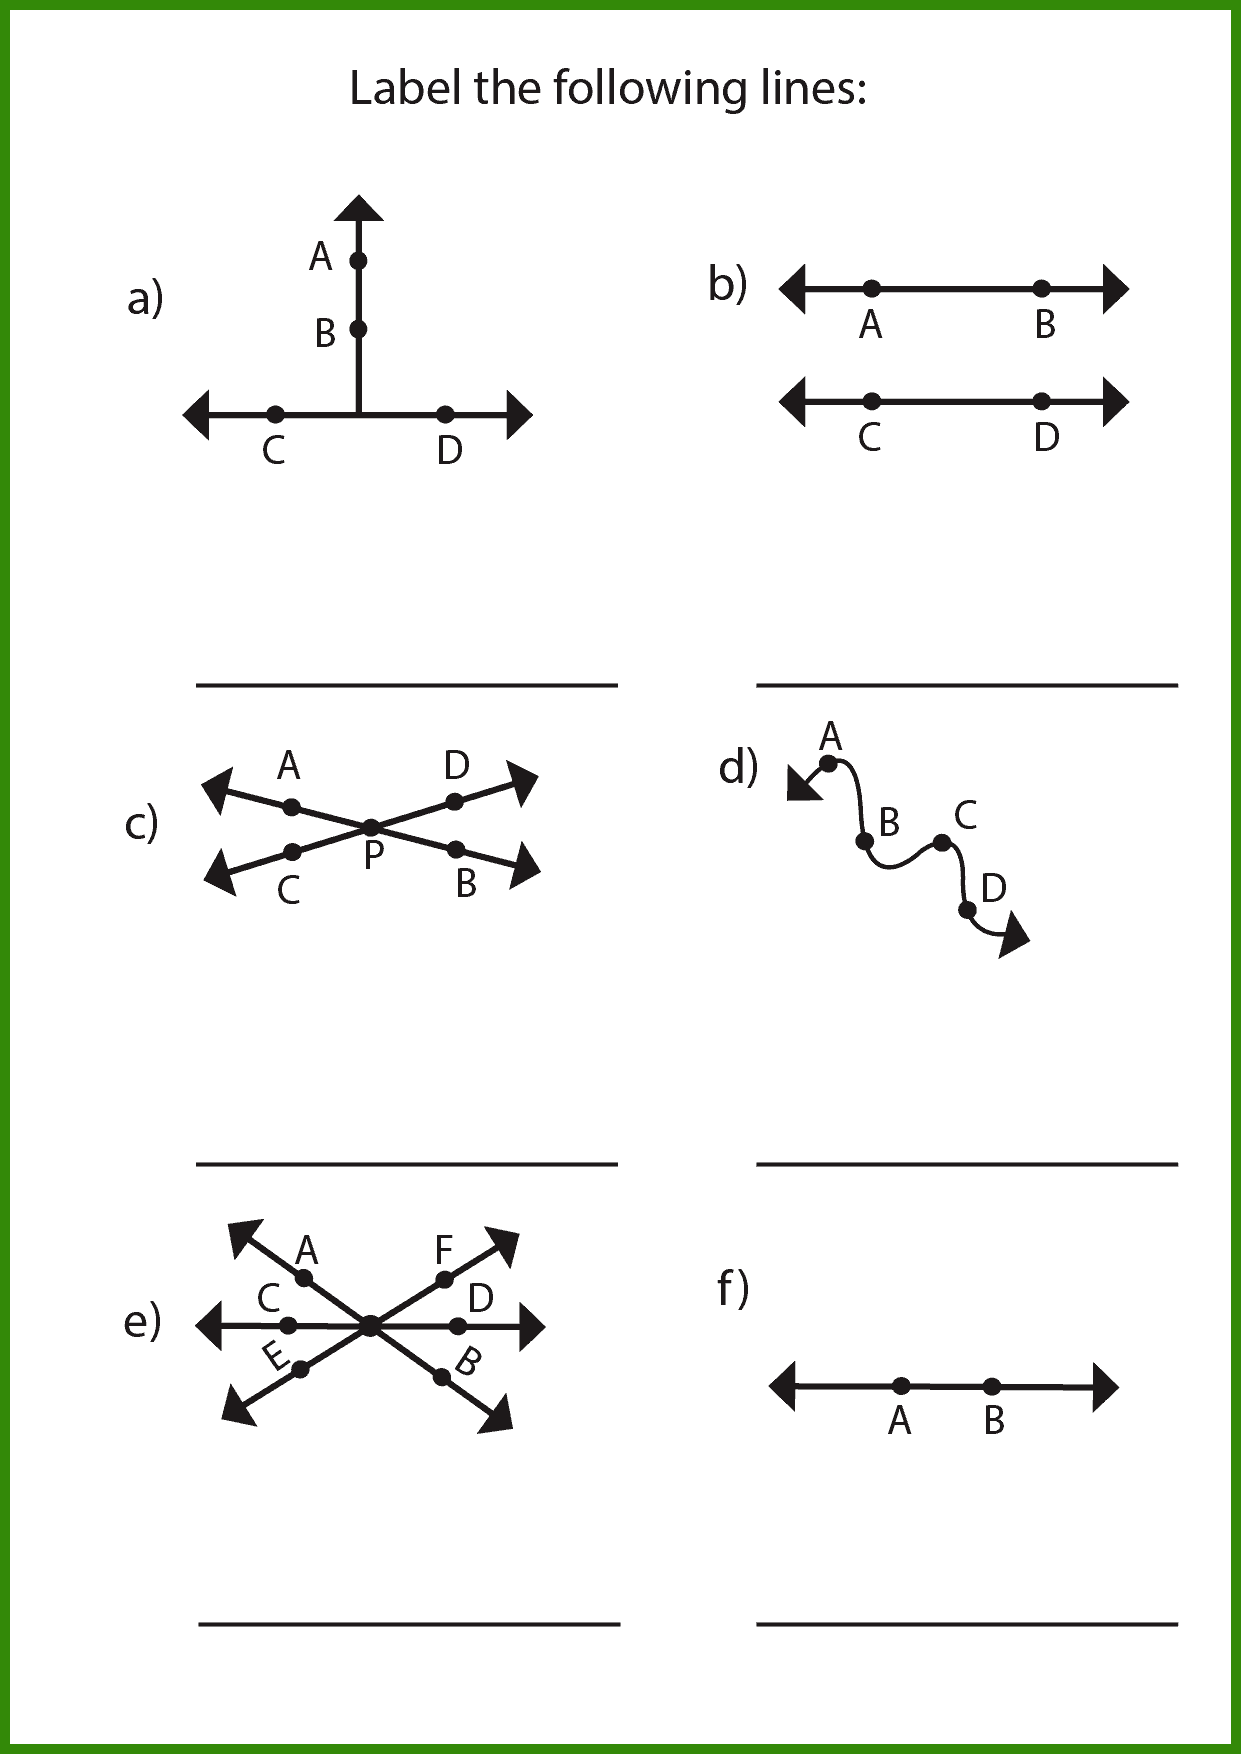 11- Identify and label the lines